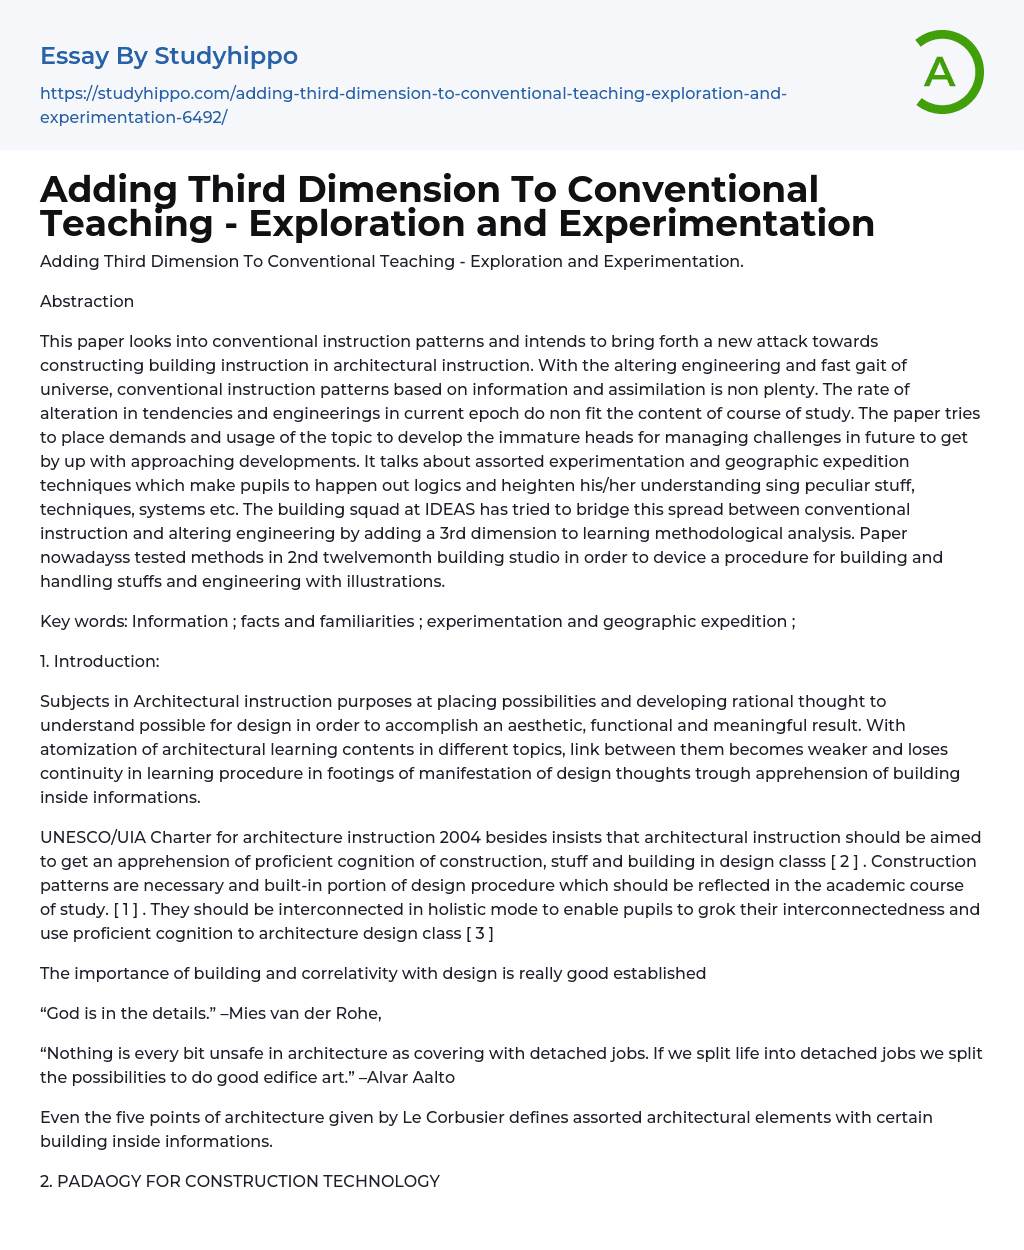 Adding Third Dimension To Conventional Teaching – Exploration and Experimentation